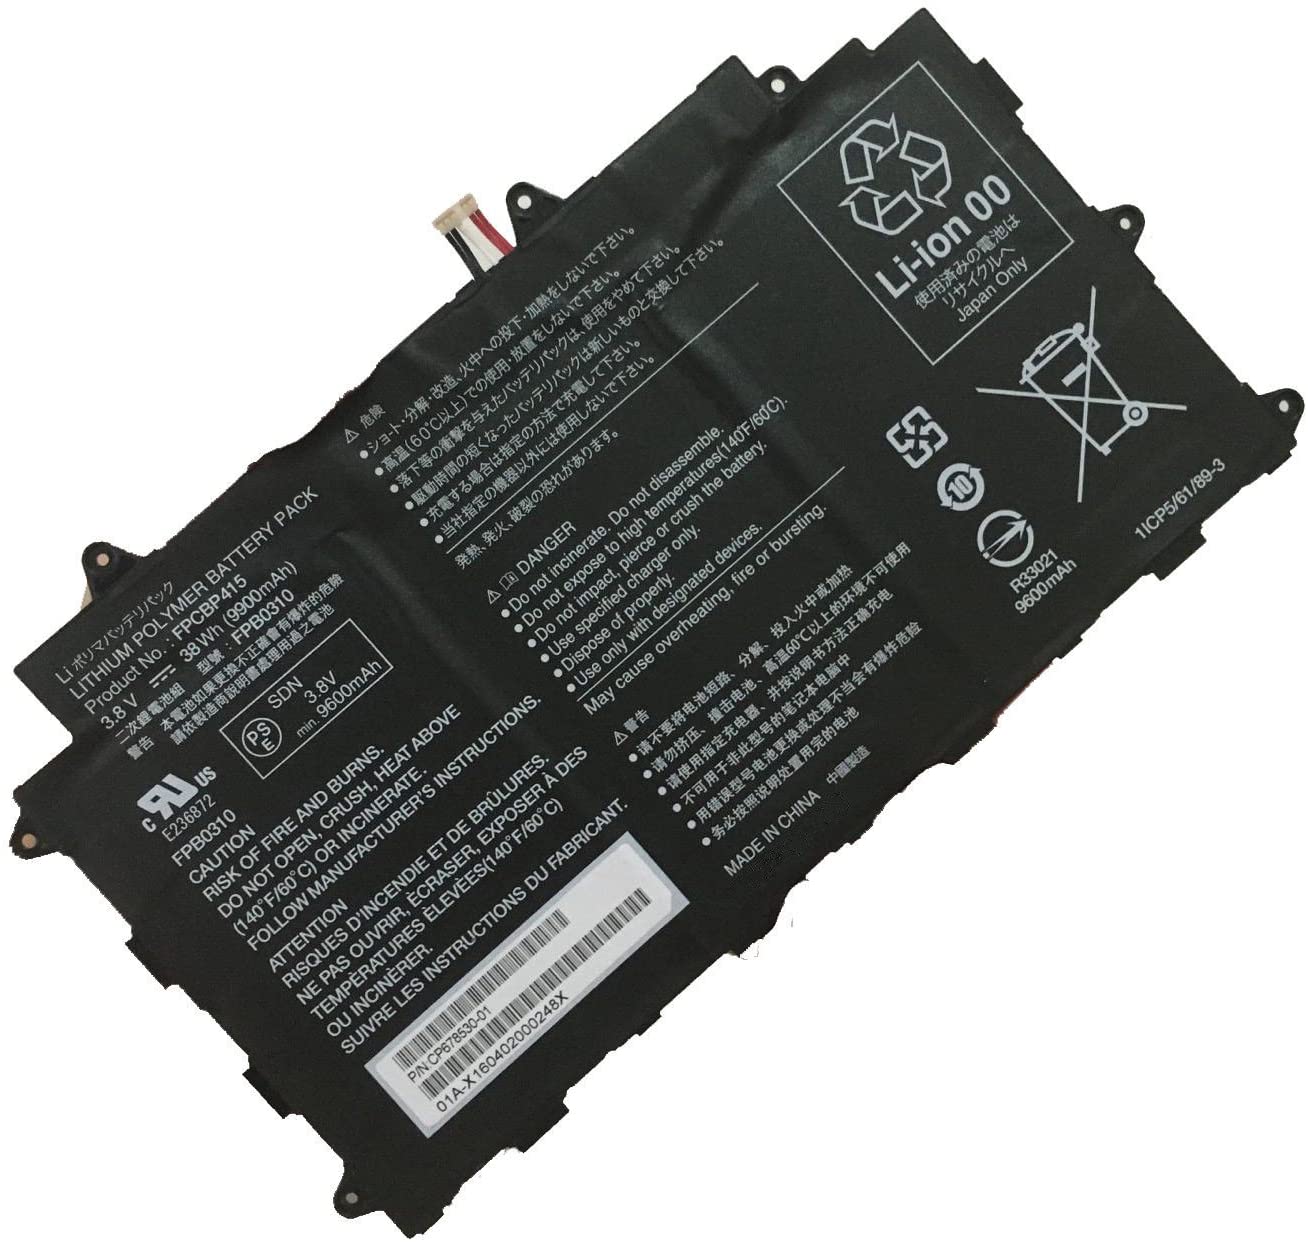 Replacement Battery for Fujitsu Fujitsu stylistic Q584 Series Tablet battery